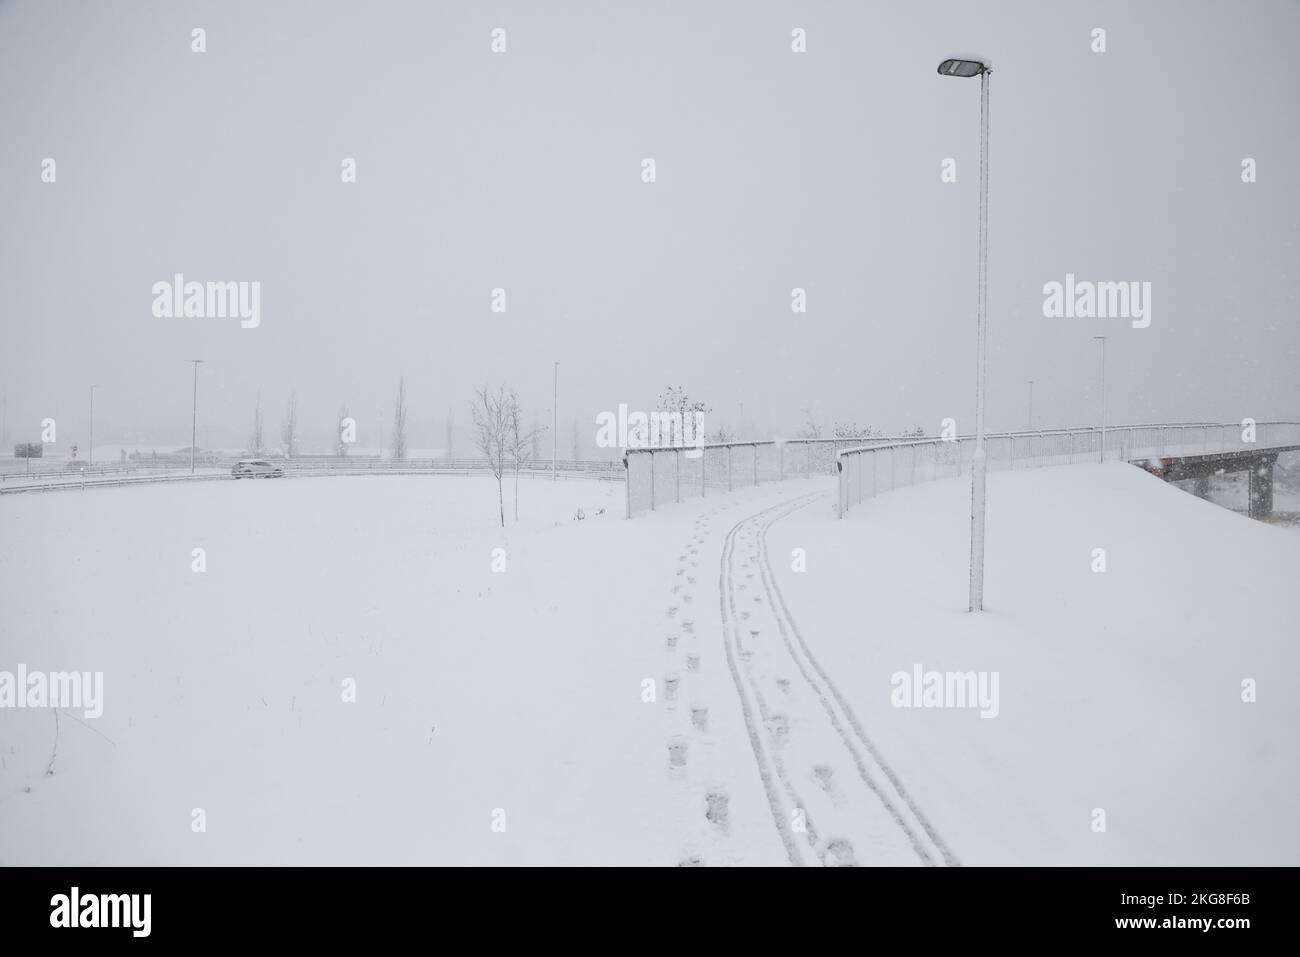 Seasonal weather. Heavy snow during Monday afternoon in Motala, Sweden. The Swedish Meteorological and Hydrological Institute (SMHI) has issued certain warnings for snowfall that may affect traffic in parts of Götaland. Stock Photo